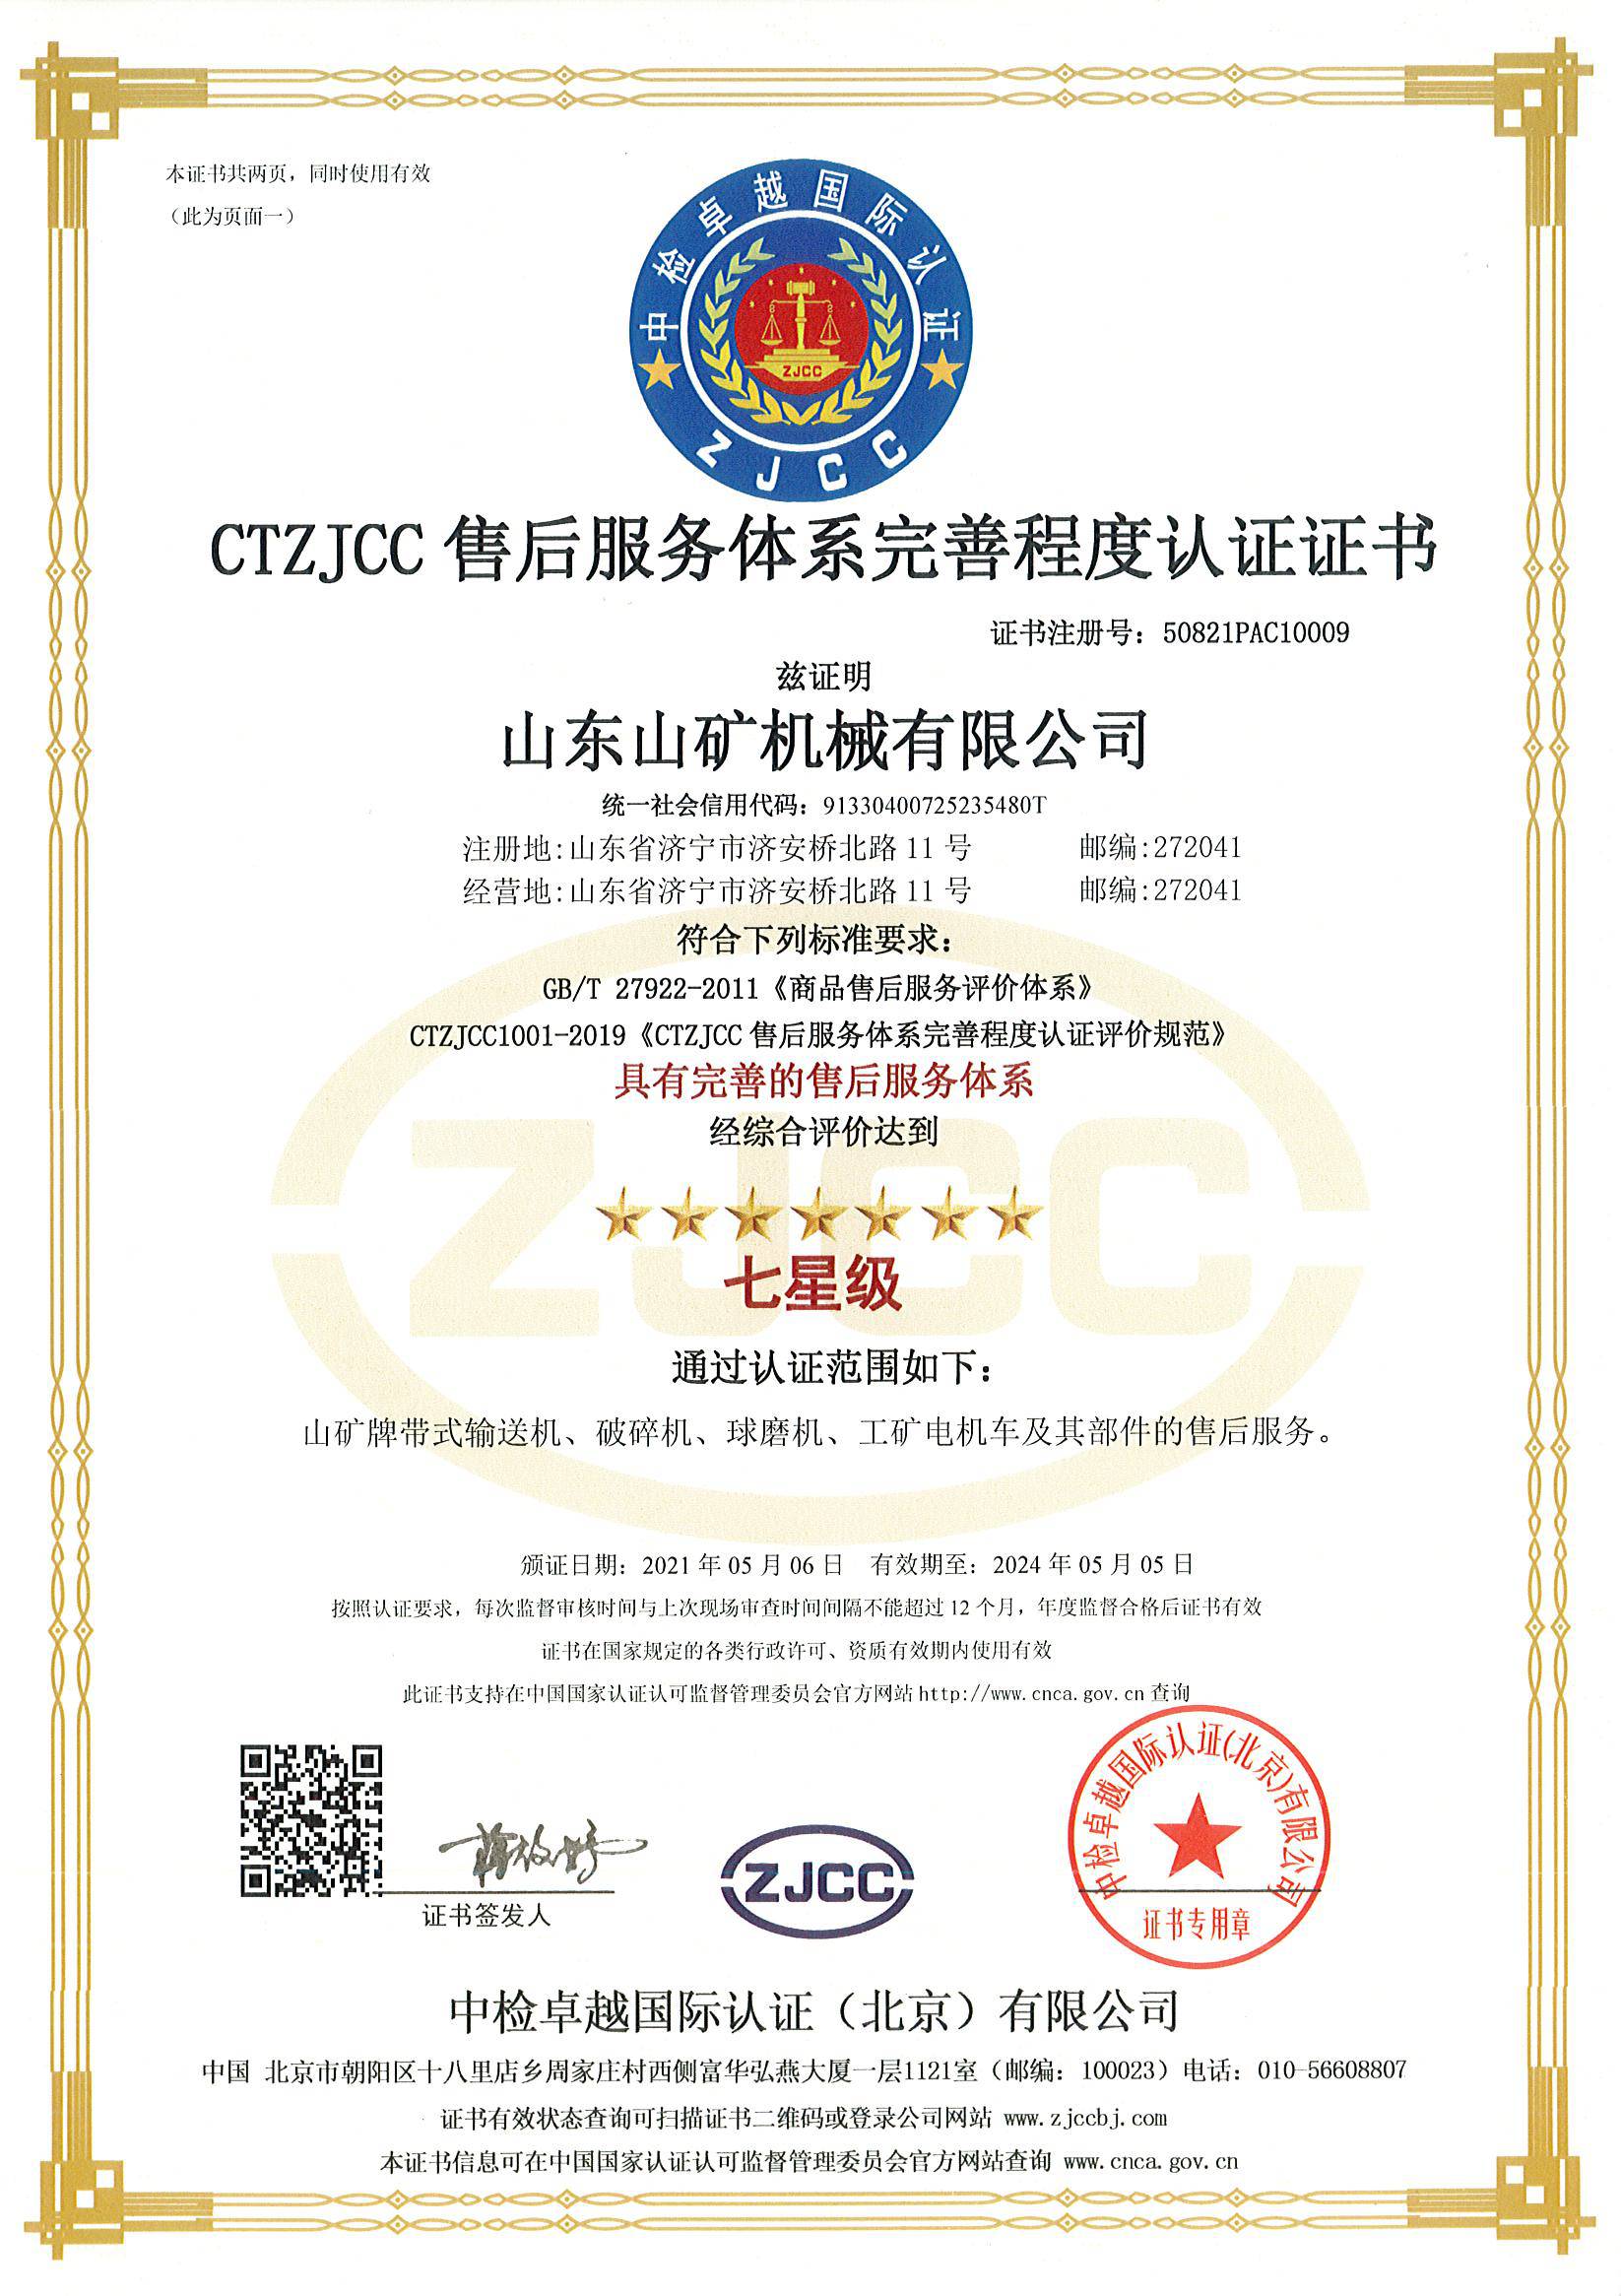 After-Sales Service System Certificate